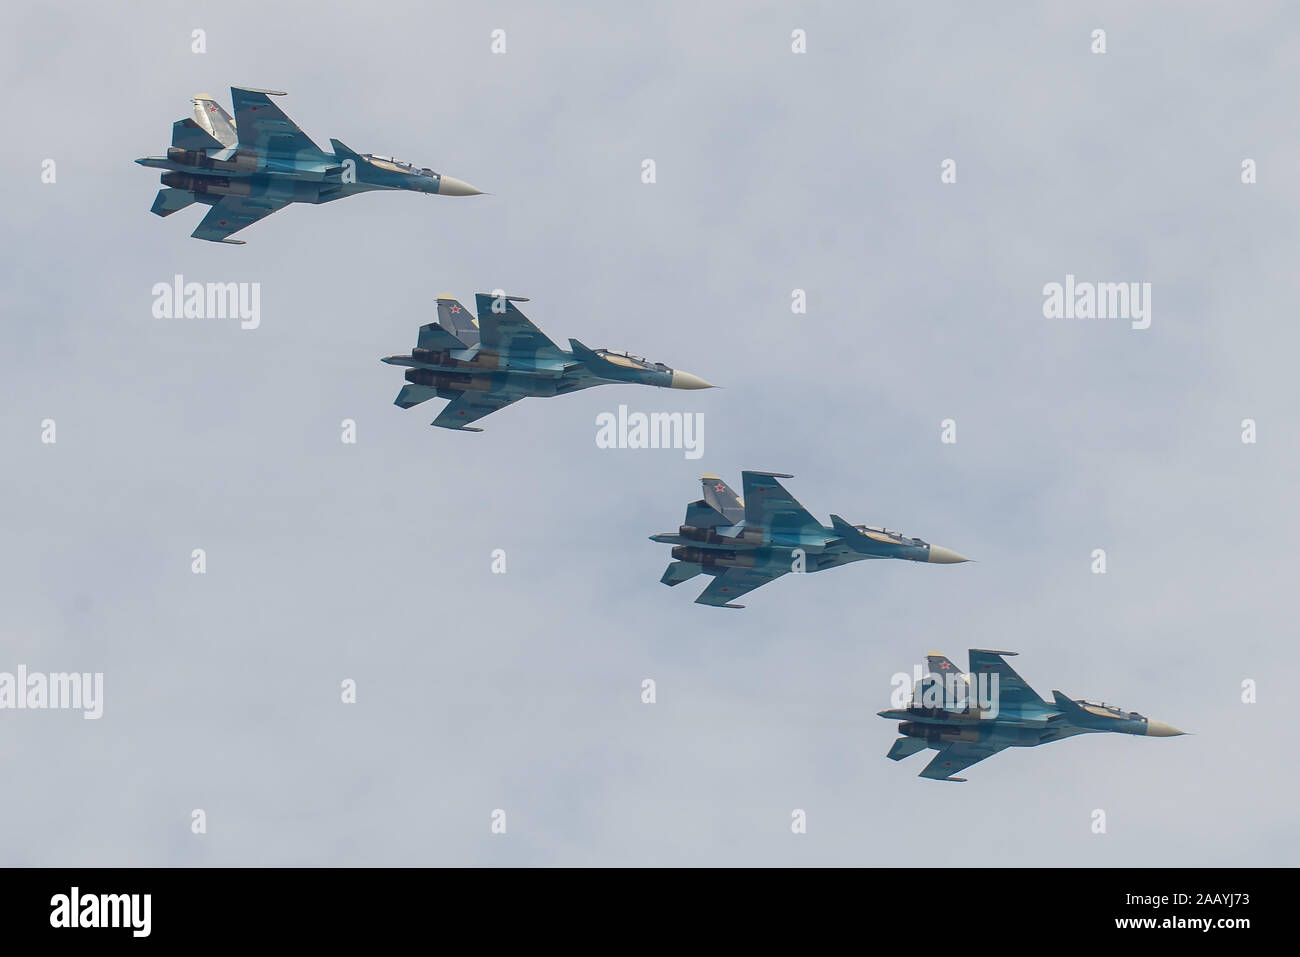 ST. PETERSBURG, RUSSIA - JULY 30, 2017: Four Russian multifunctional supersonic fighter-bomber Su-34 at a military parade in honor of the Navy Day Stock Photo